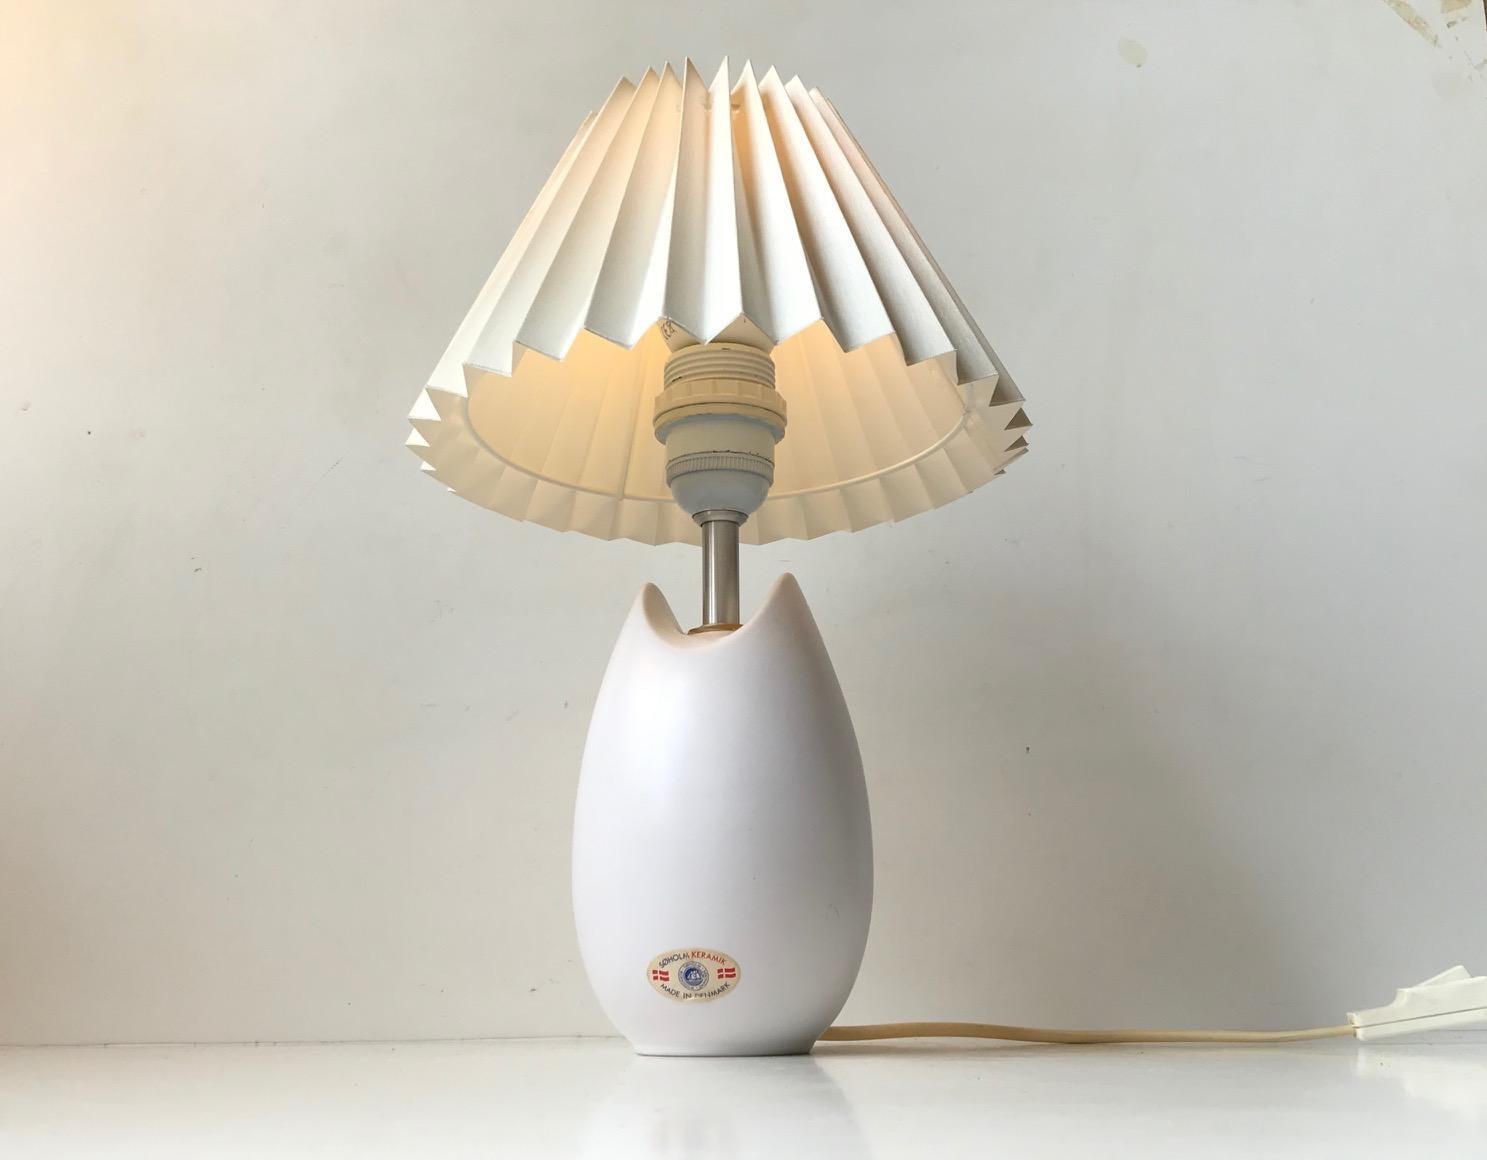 Organically shaped ceramic table light with a matté white glaze designed by Per Rehfeld and manufactured by Soholm in Denmark during the early 90s. Design number: 3491-1, stamped and labeled by the maker to the base. The model shade is not included.